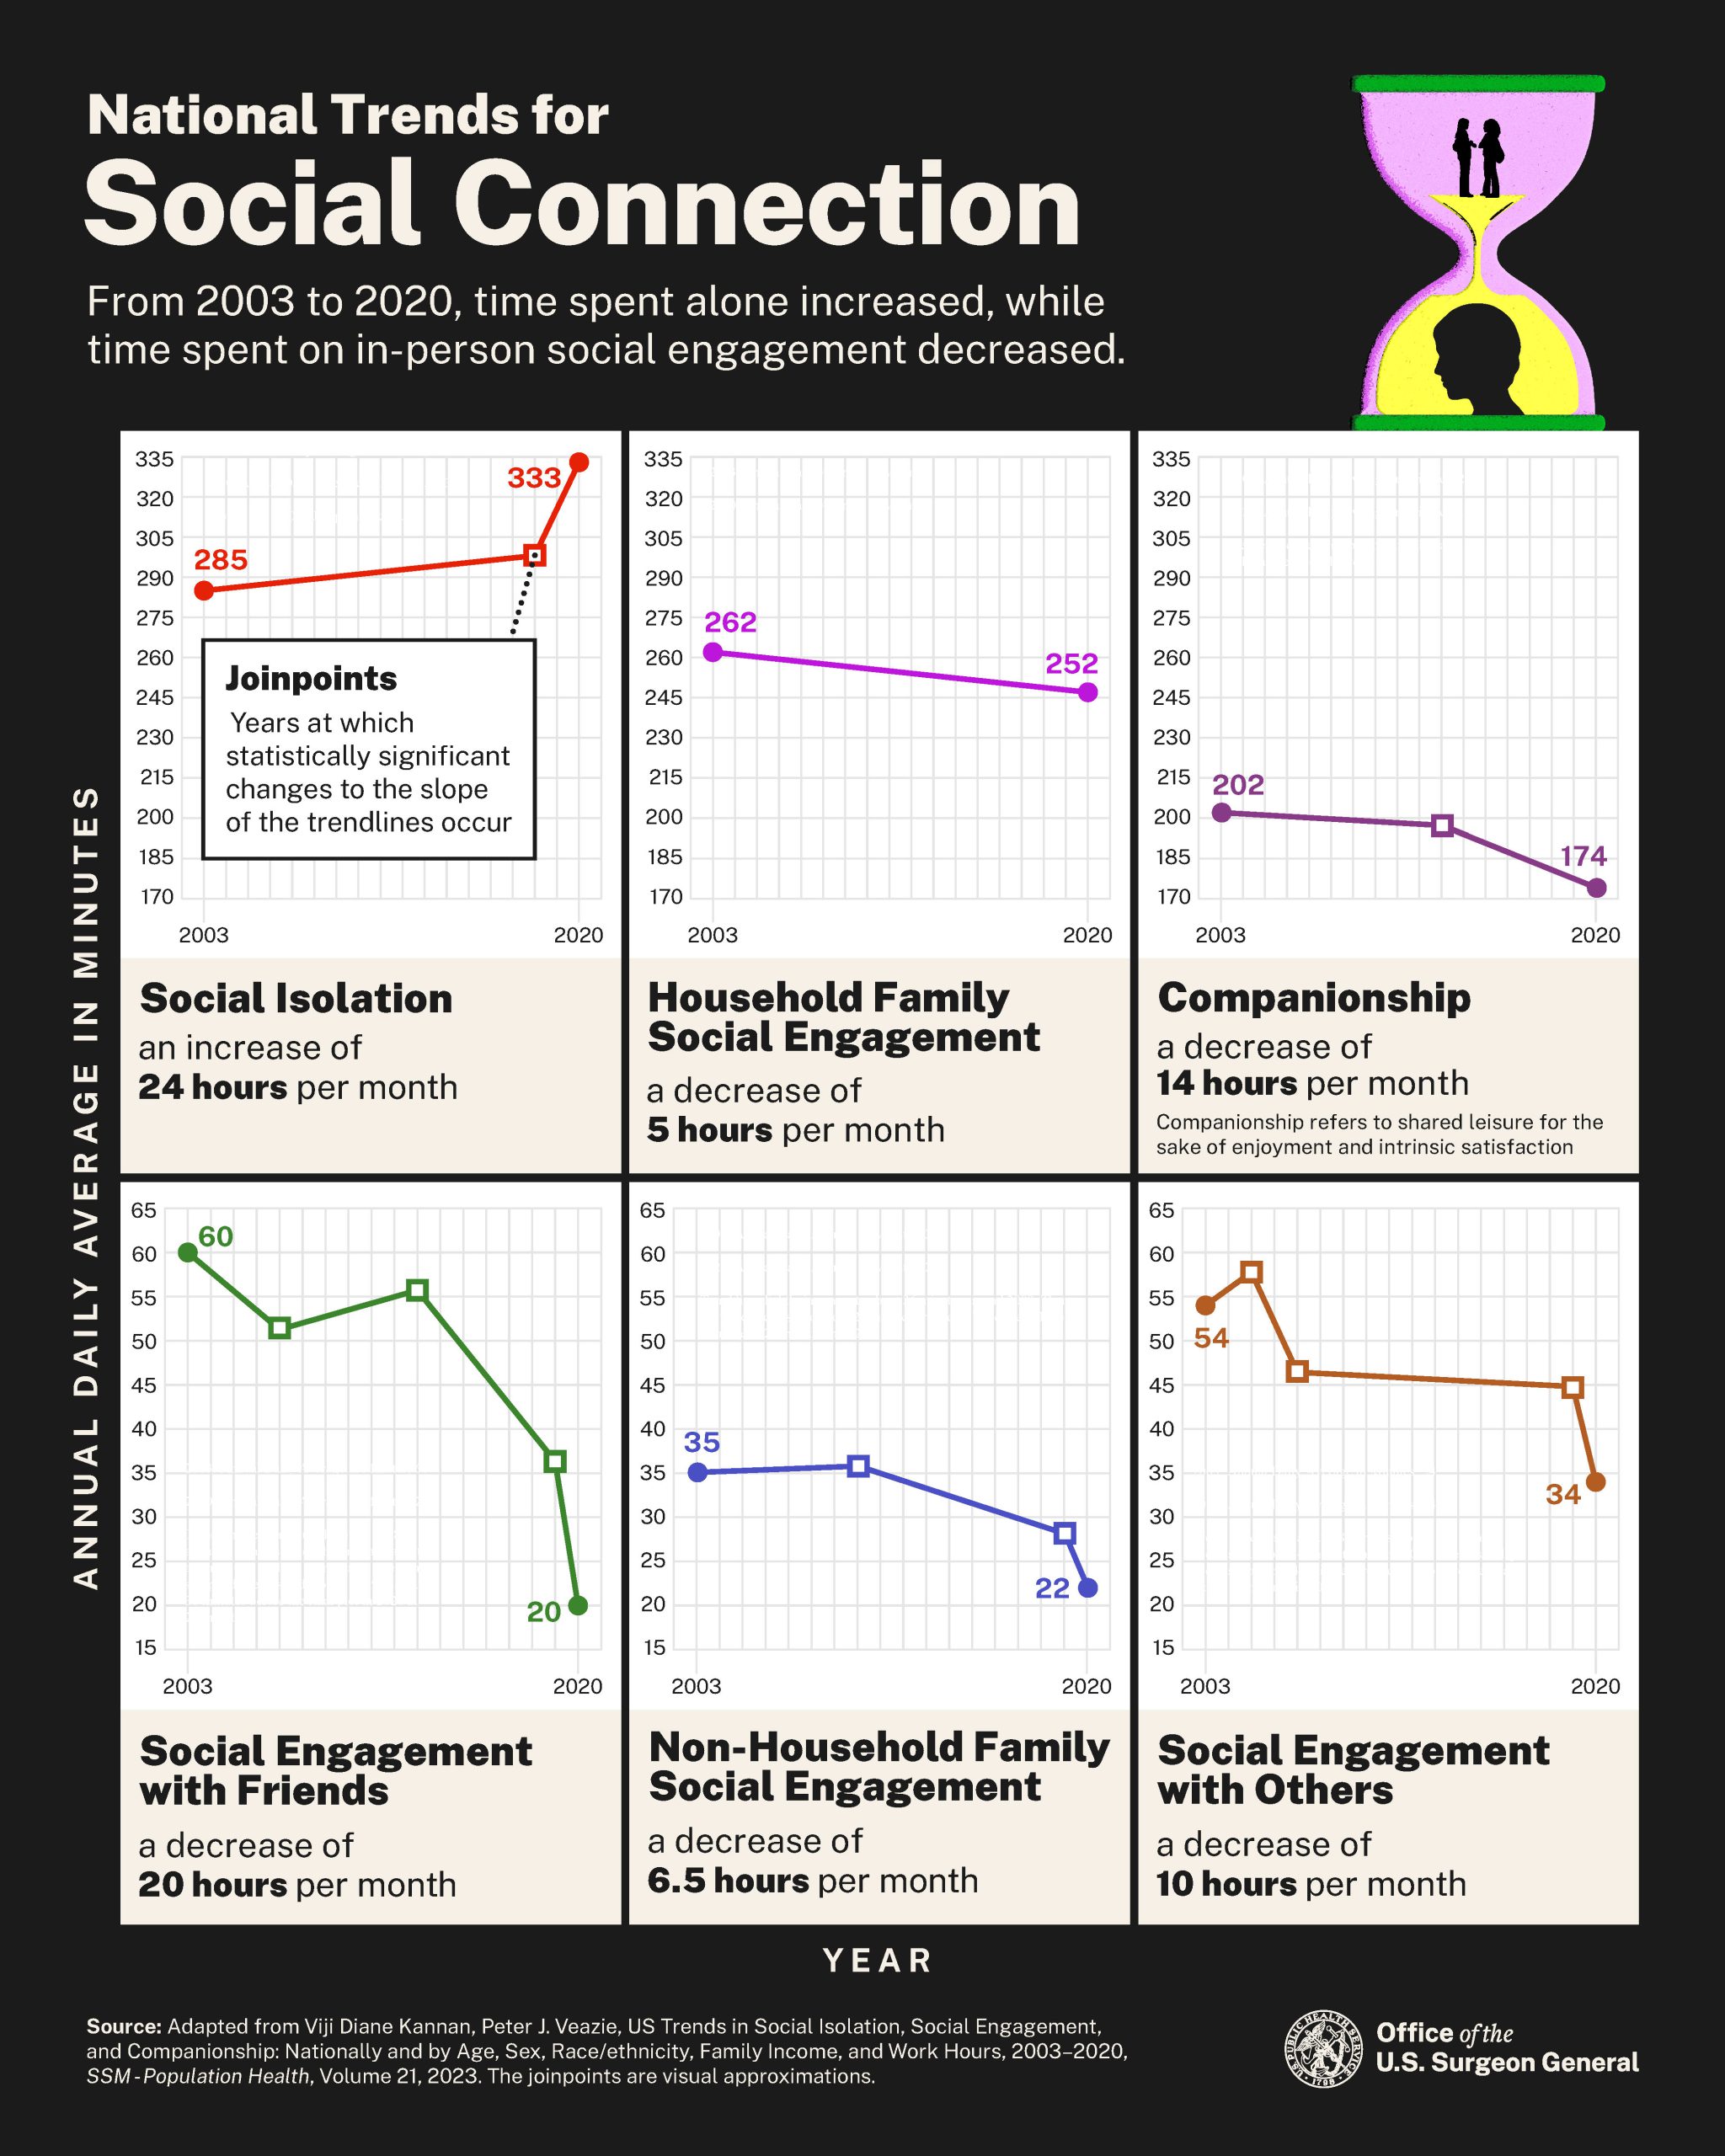 Image with graphs of social connection trends. 